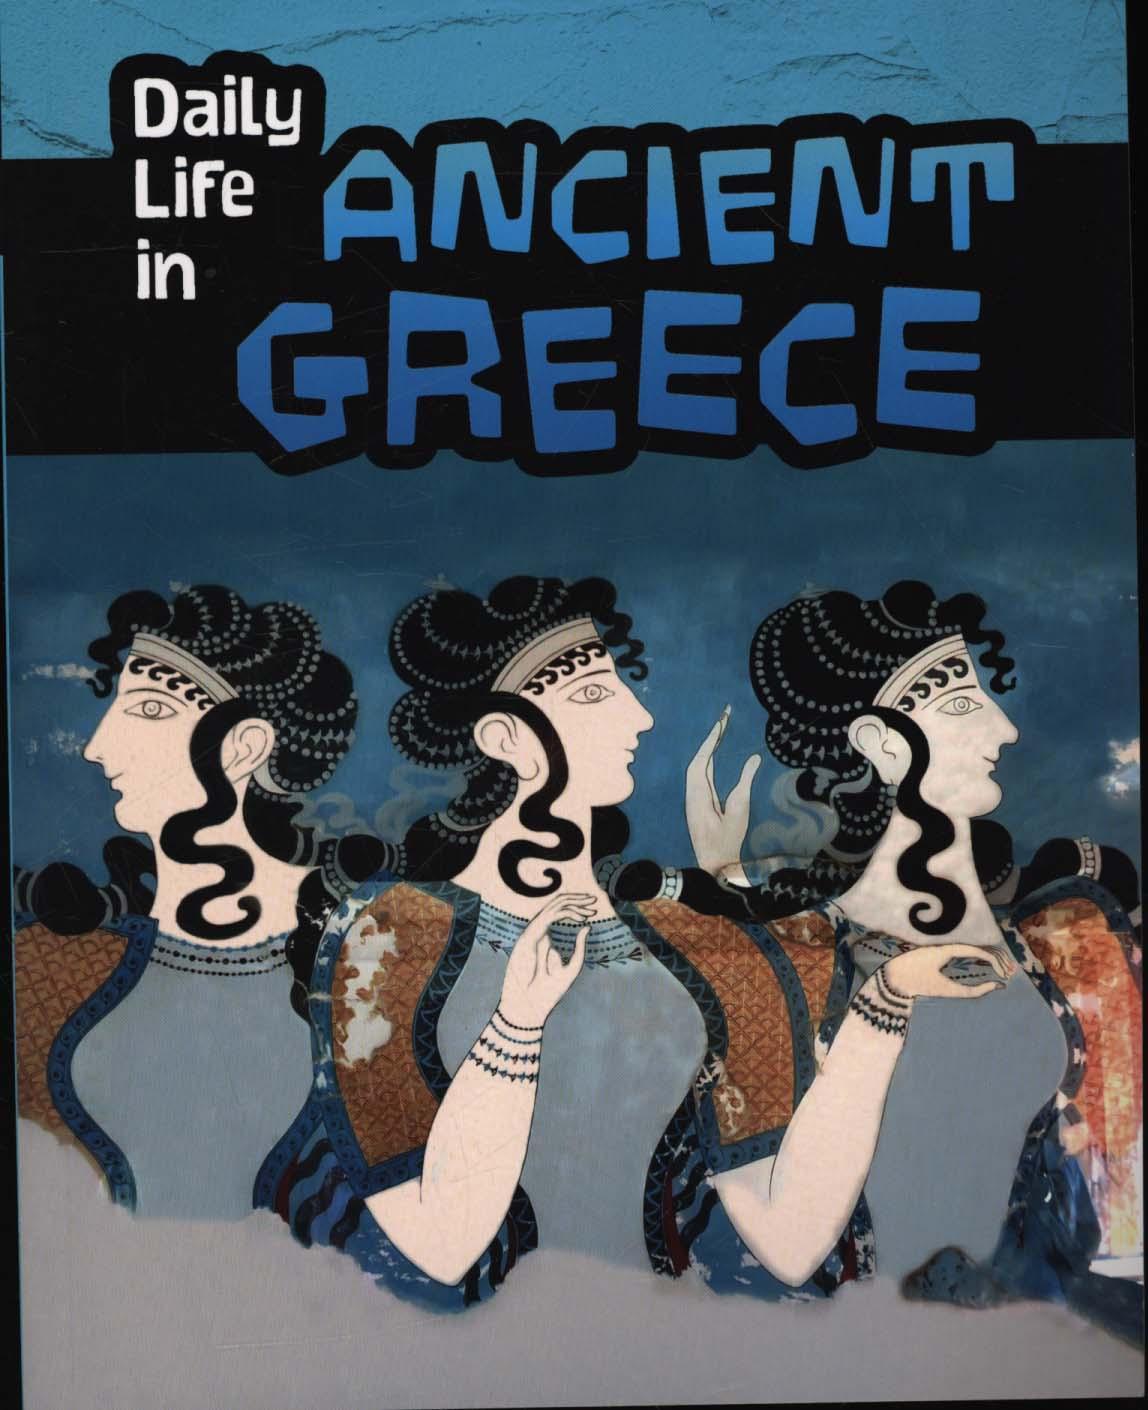 Daily Life in Ancient Greece